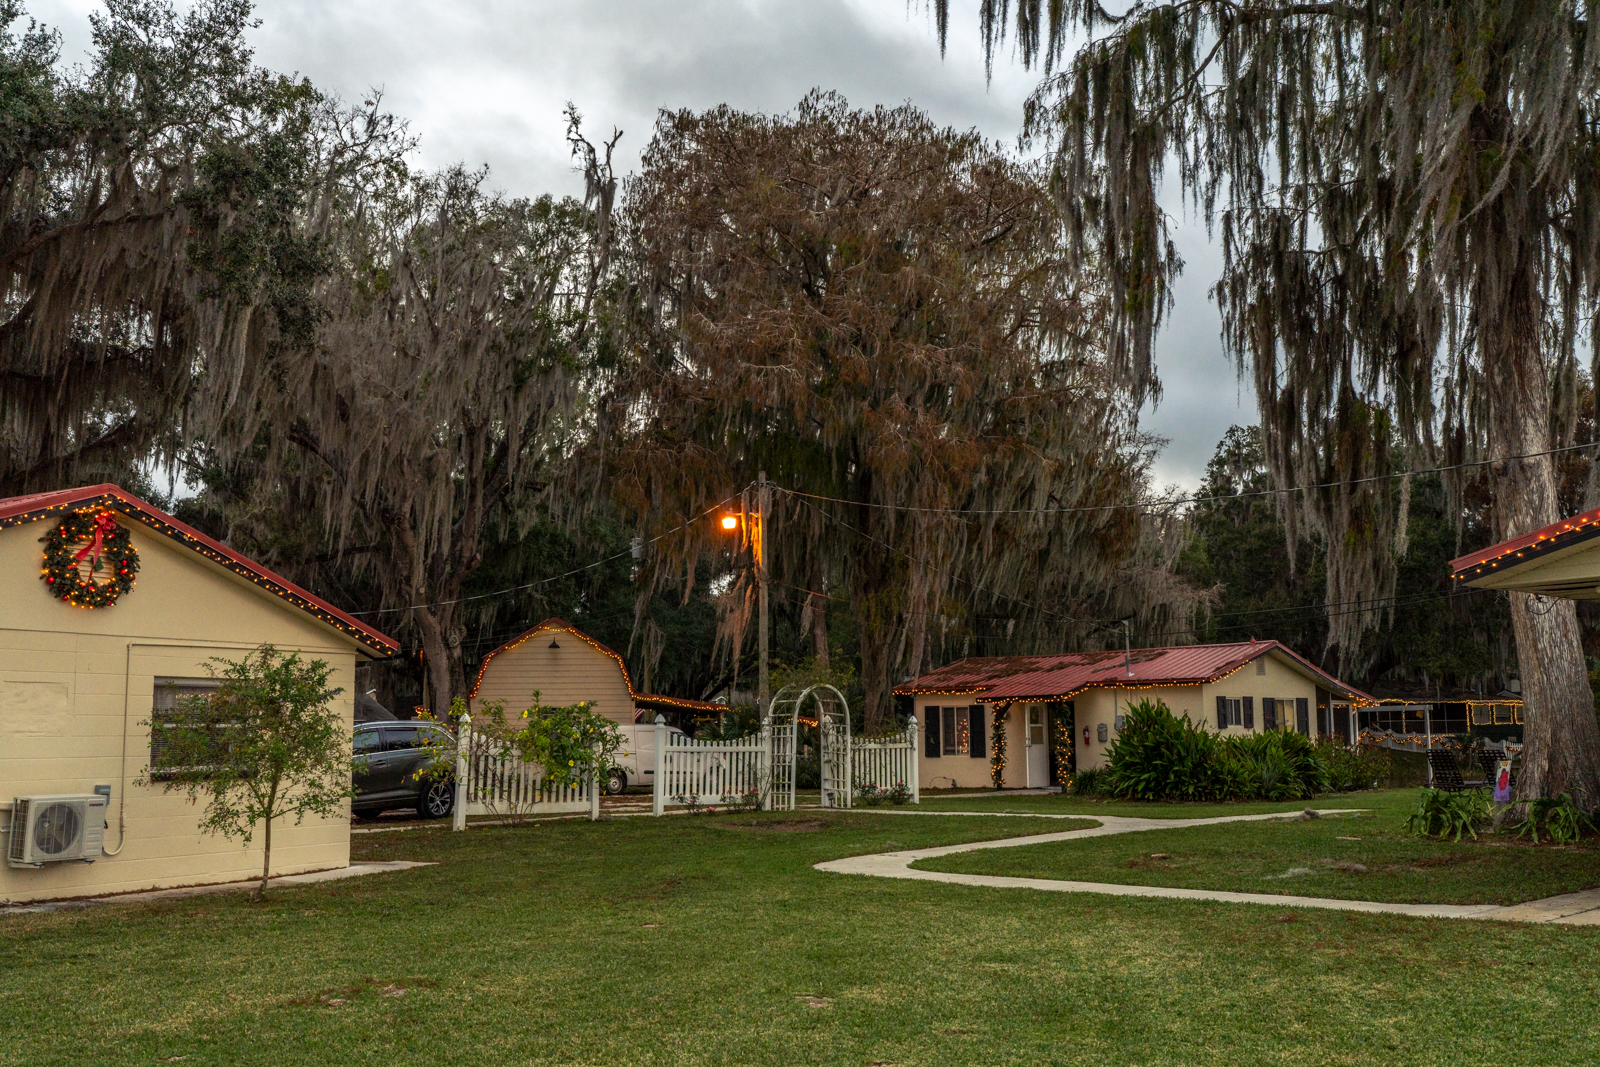 A wide-angle shot of Sunshine Lodge. There are three yellow buildings in the photo, each of which are decorated with yellow Christmas lights. The building on the left has a wreath on the side of it. Spanish moss hangs from trees and there is a light lit up on a short wooden telephone pole in the middle of the photo.